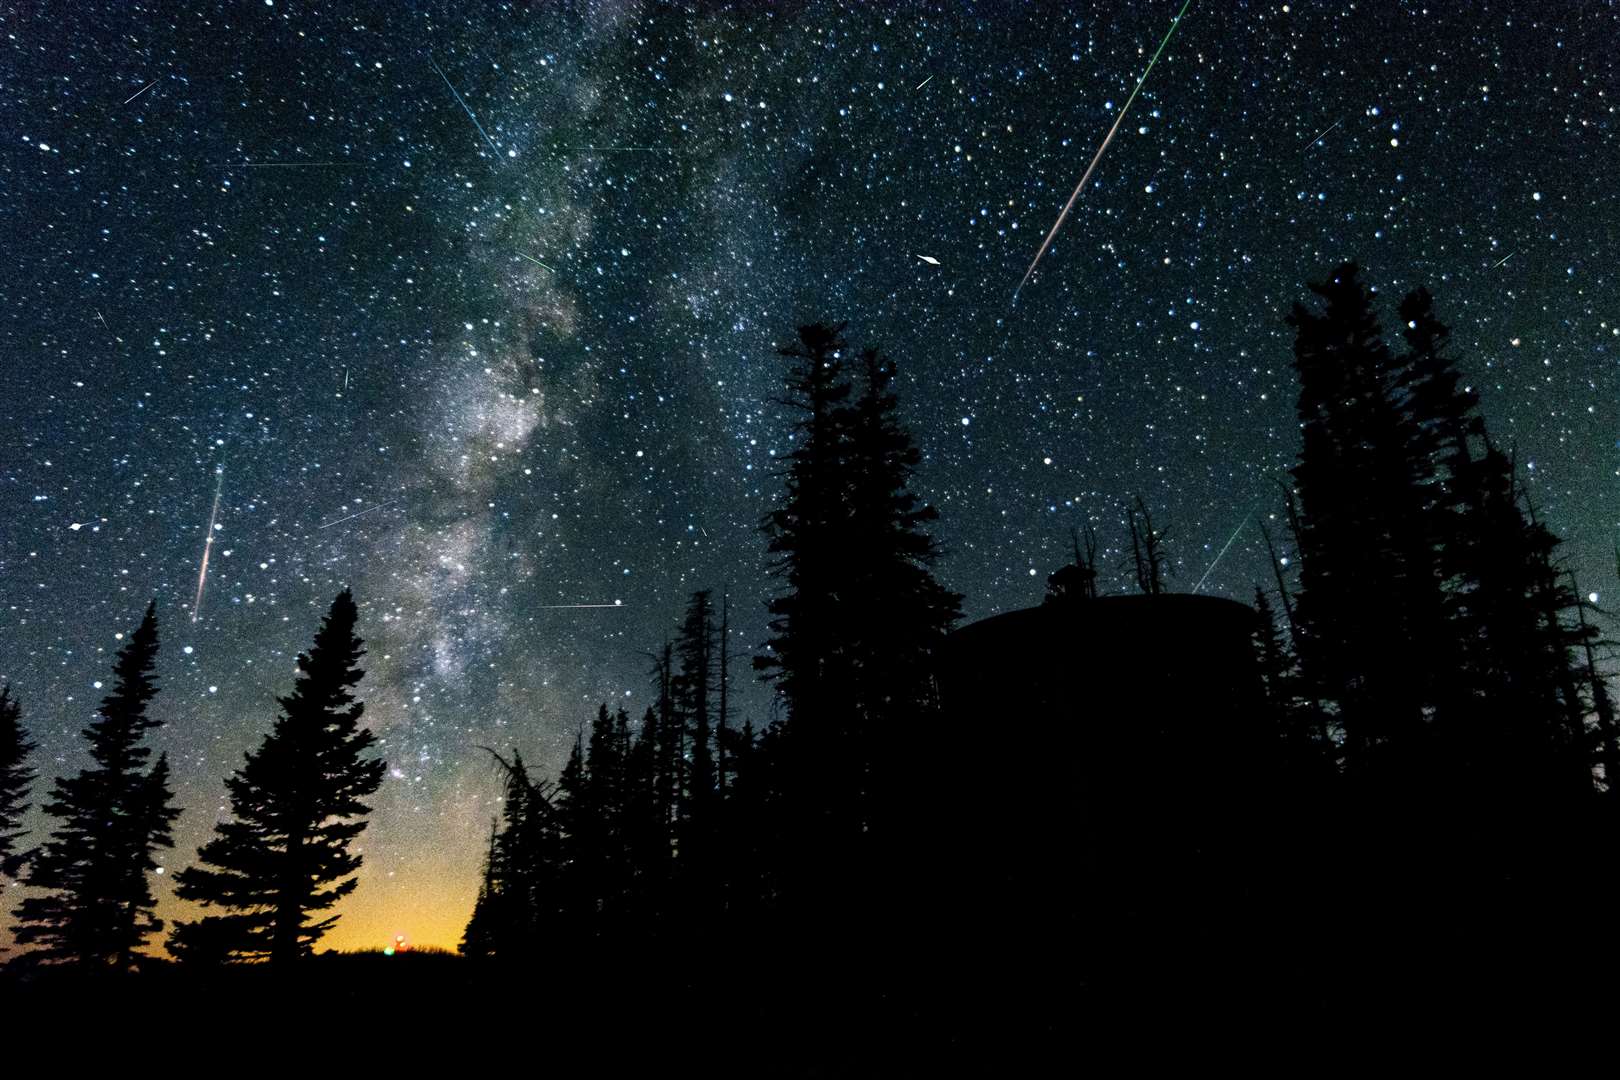 Viewers need to aim for a clear sky away from light pollution. Image: iStock.